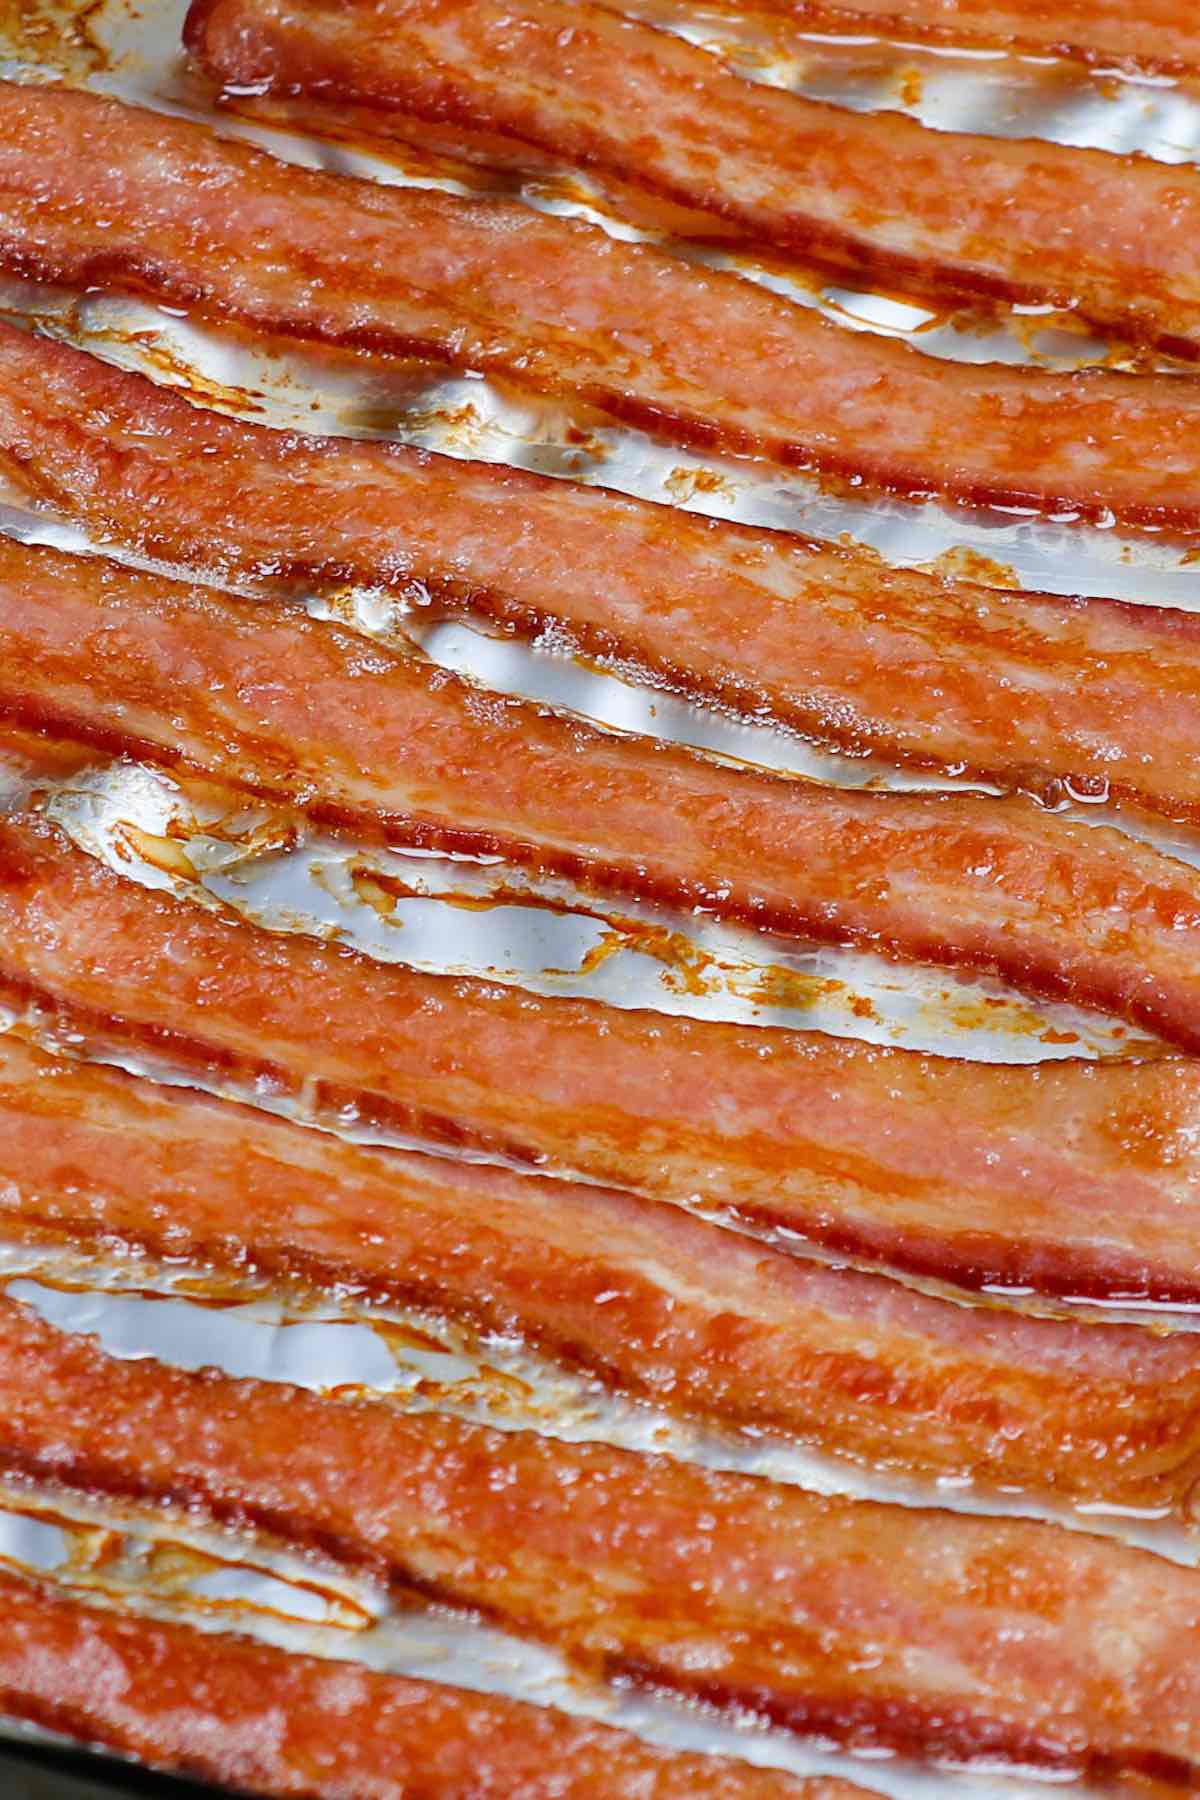 Learn how long to cook bacon in the oven at any temperature including 400, 350 and 375 degrees. Whether you’ve got regular or thick cut, you can make crispy bacon easily by using a parchment-lined pan with or without a rack. It’s a great way to feed a crowd!